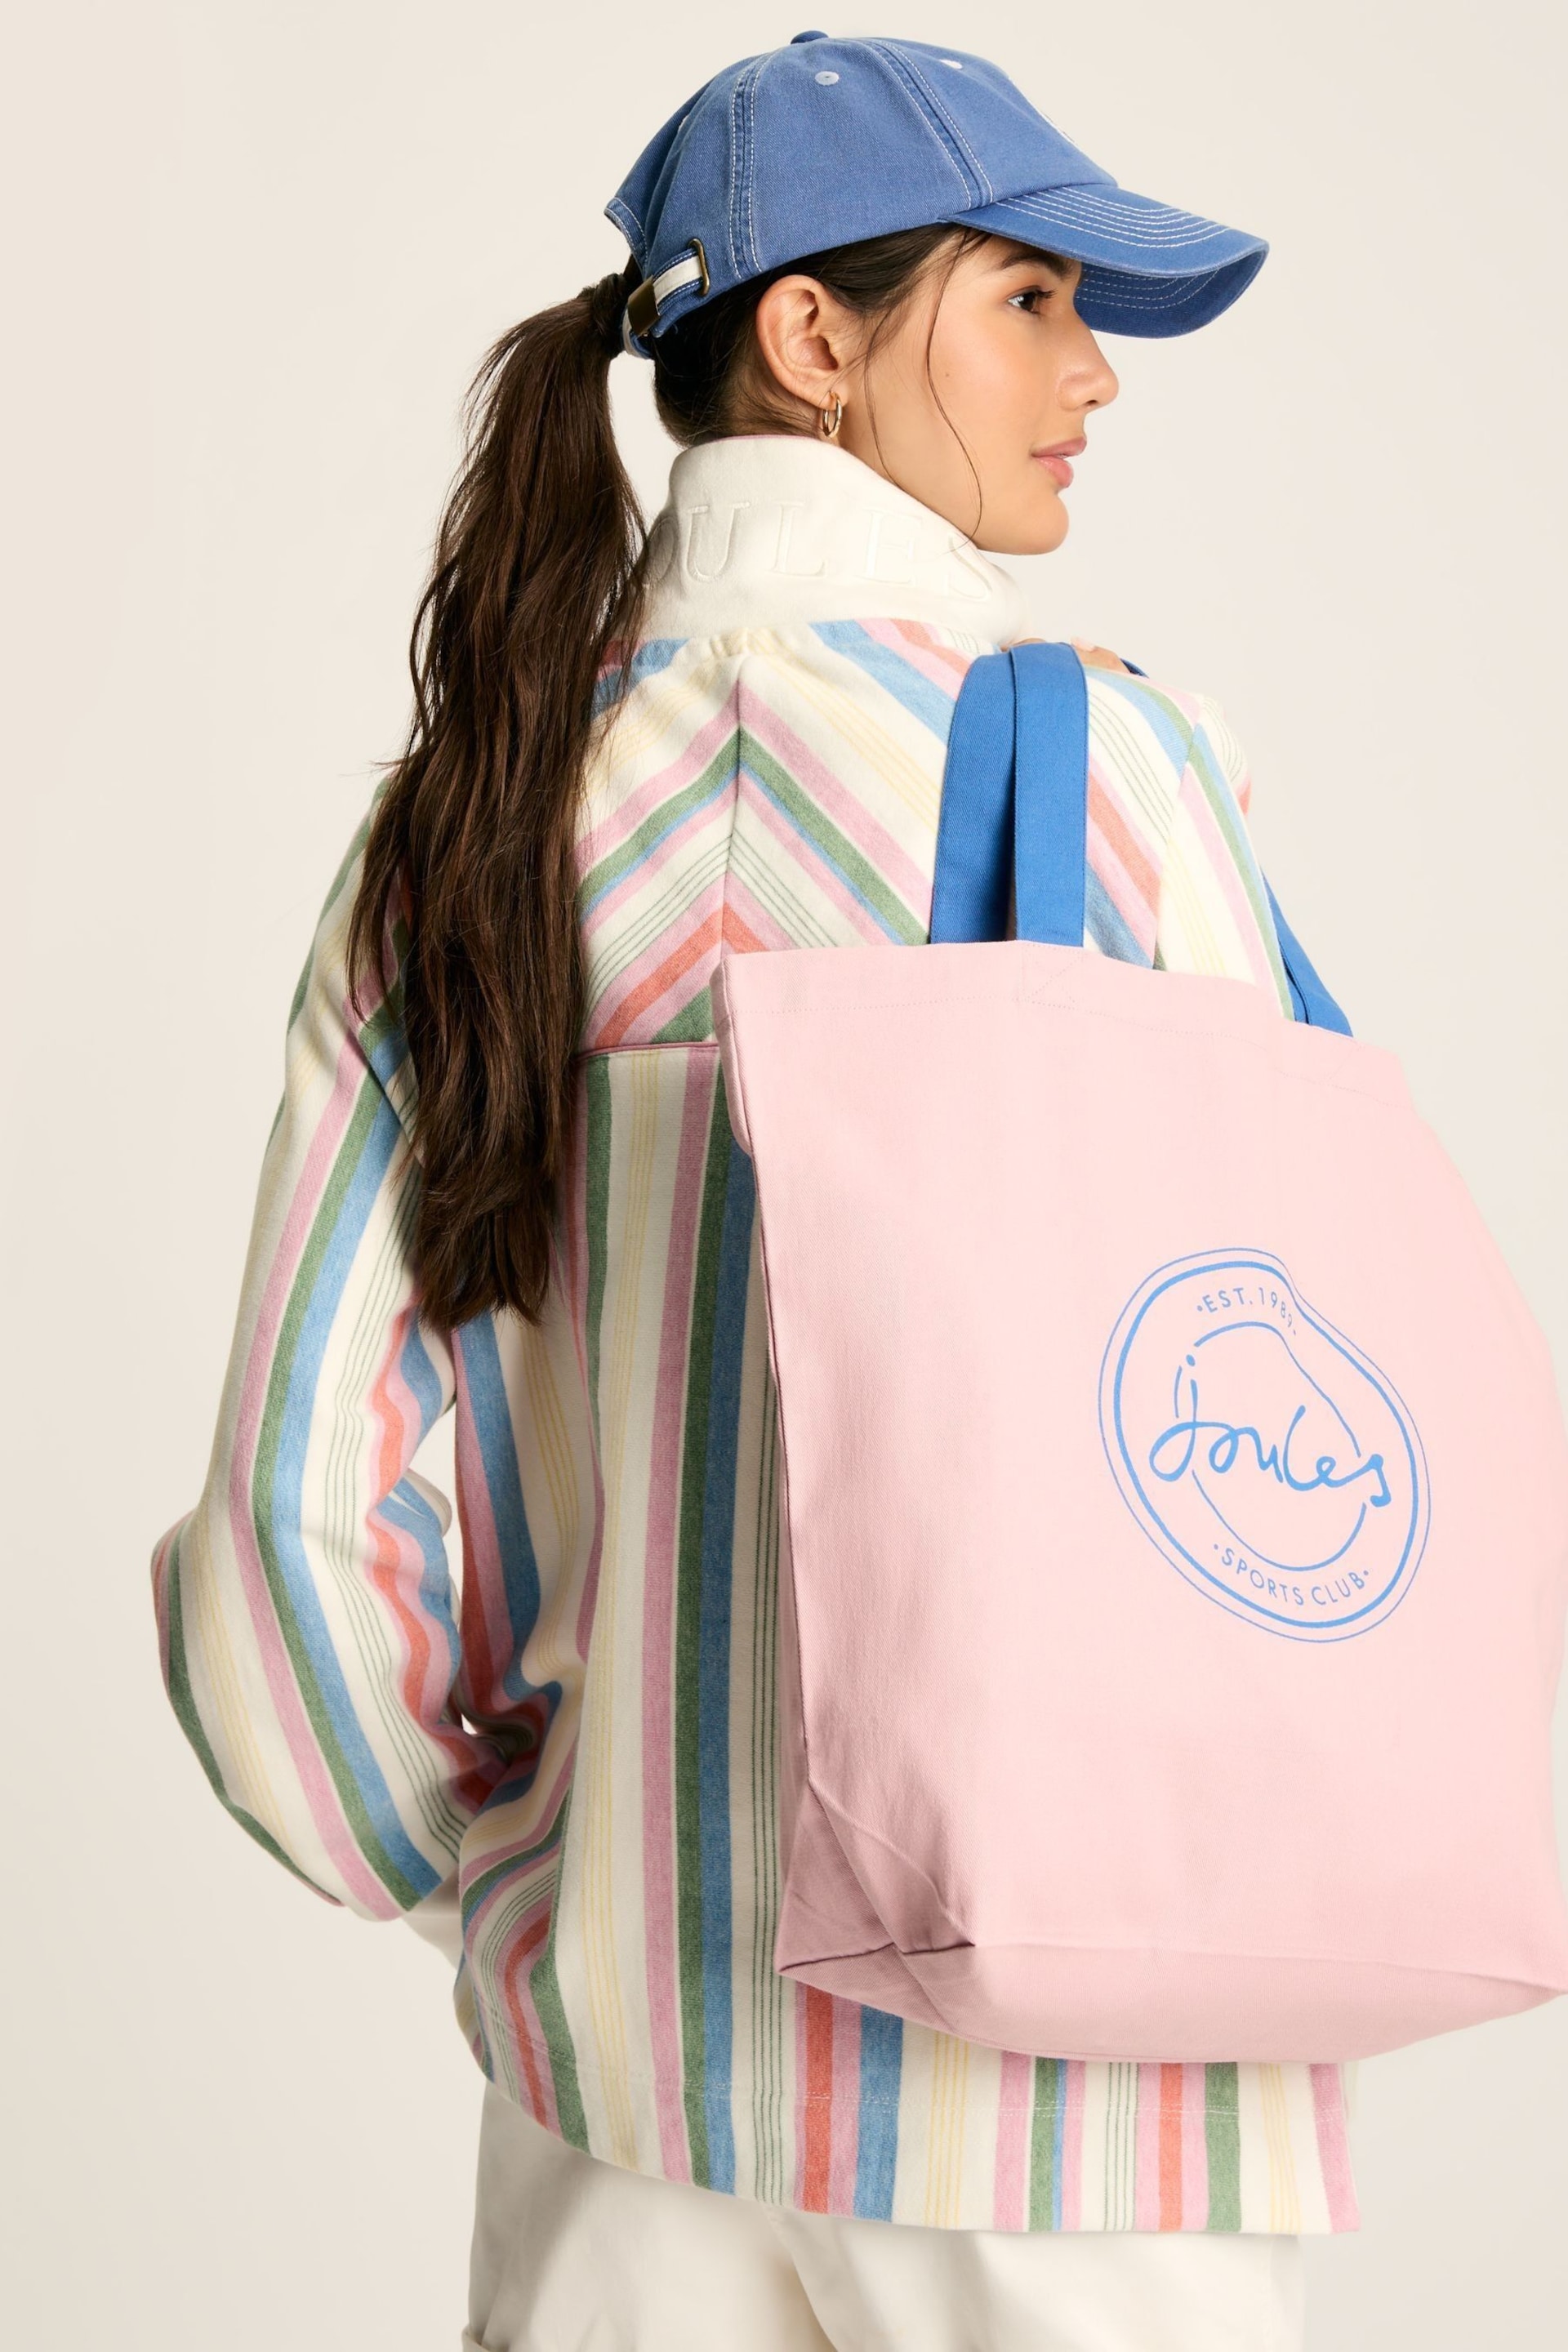 Joules Courtside Pink Tote Bag - Image 1 of 4